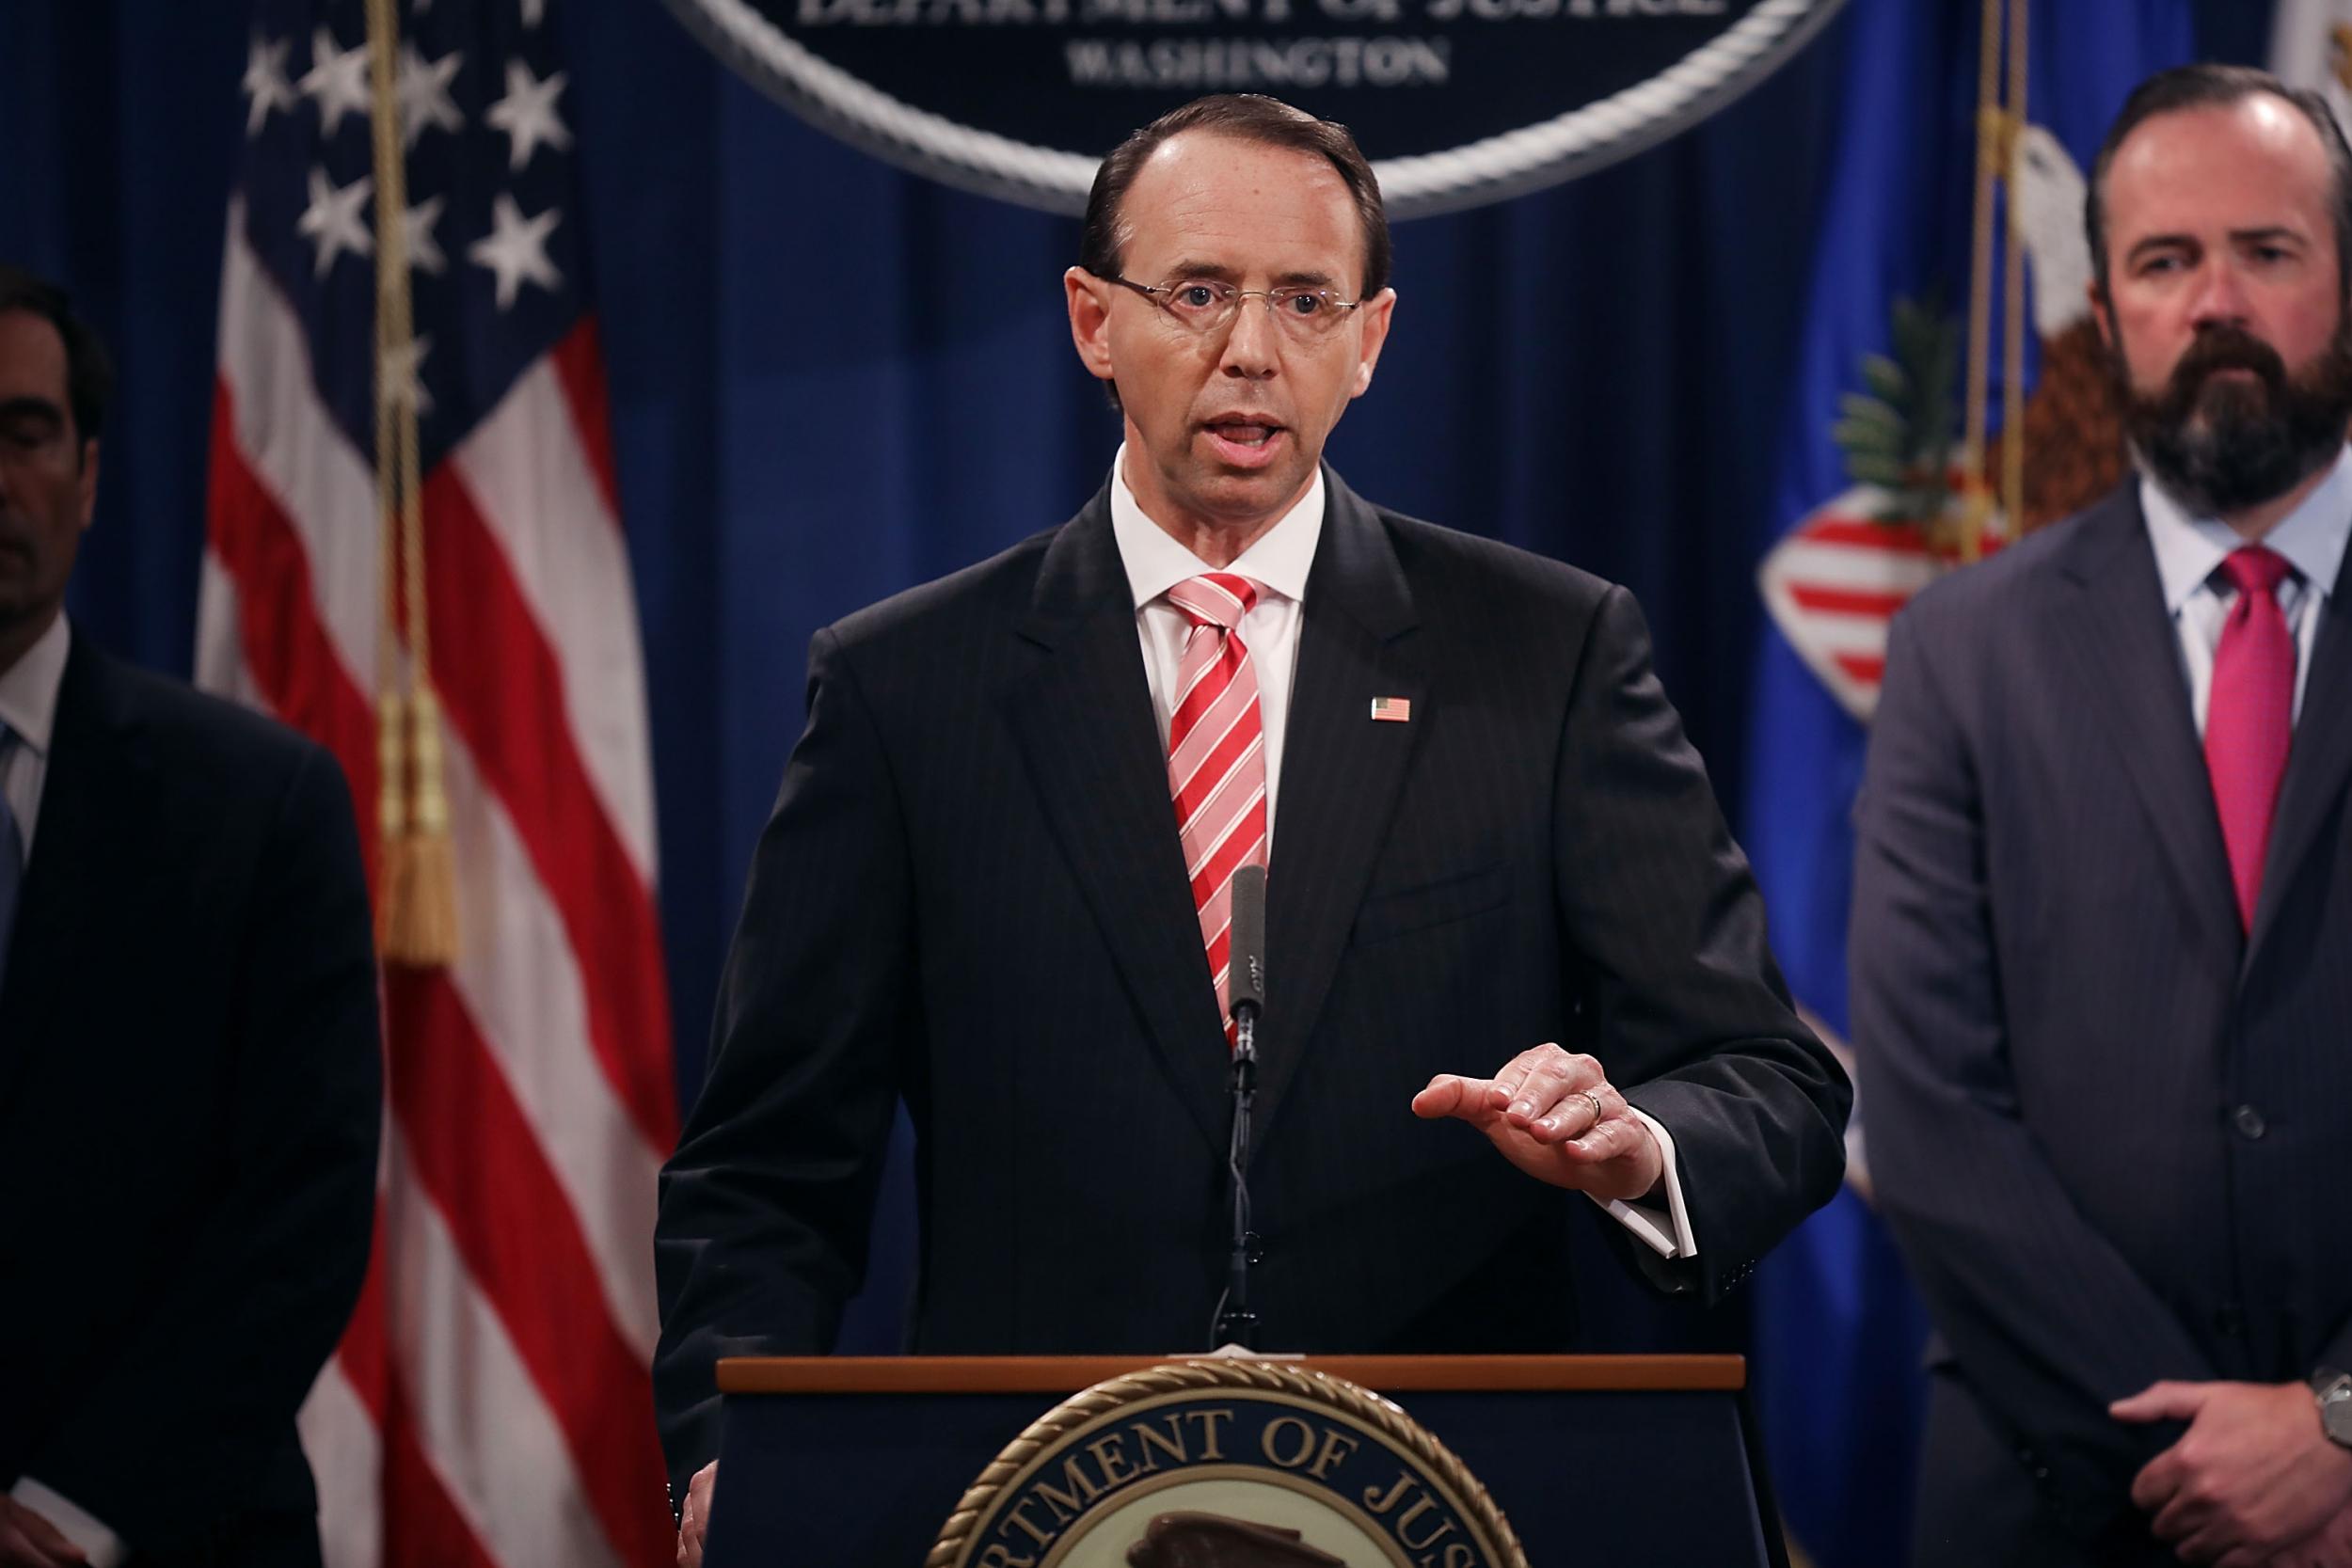 Deputy Attorney General Rod Rosenstein holds a news conference at the Department of Justice